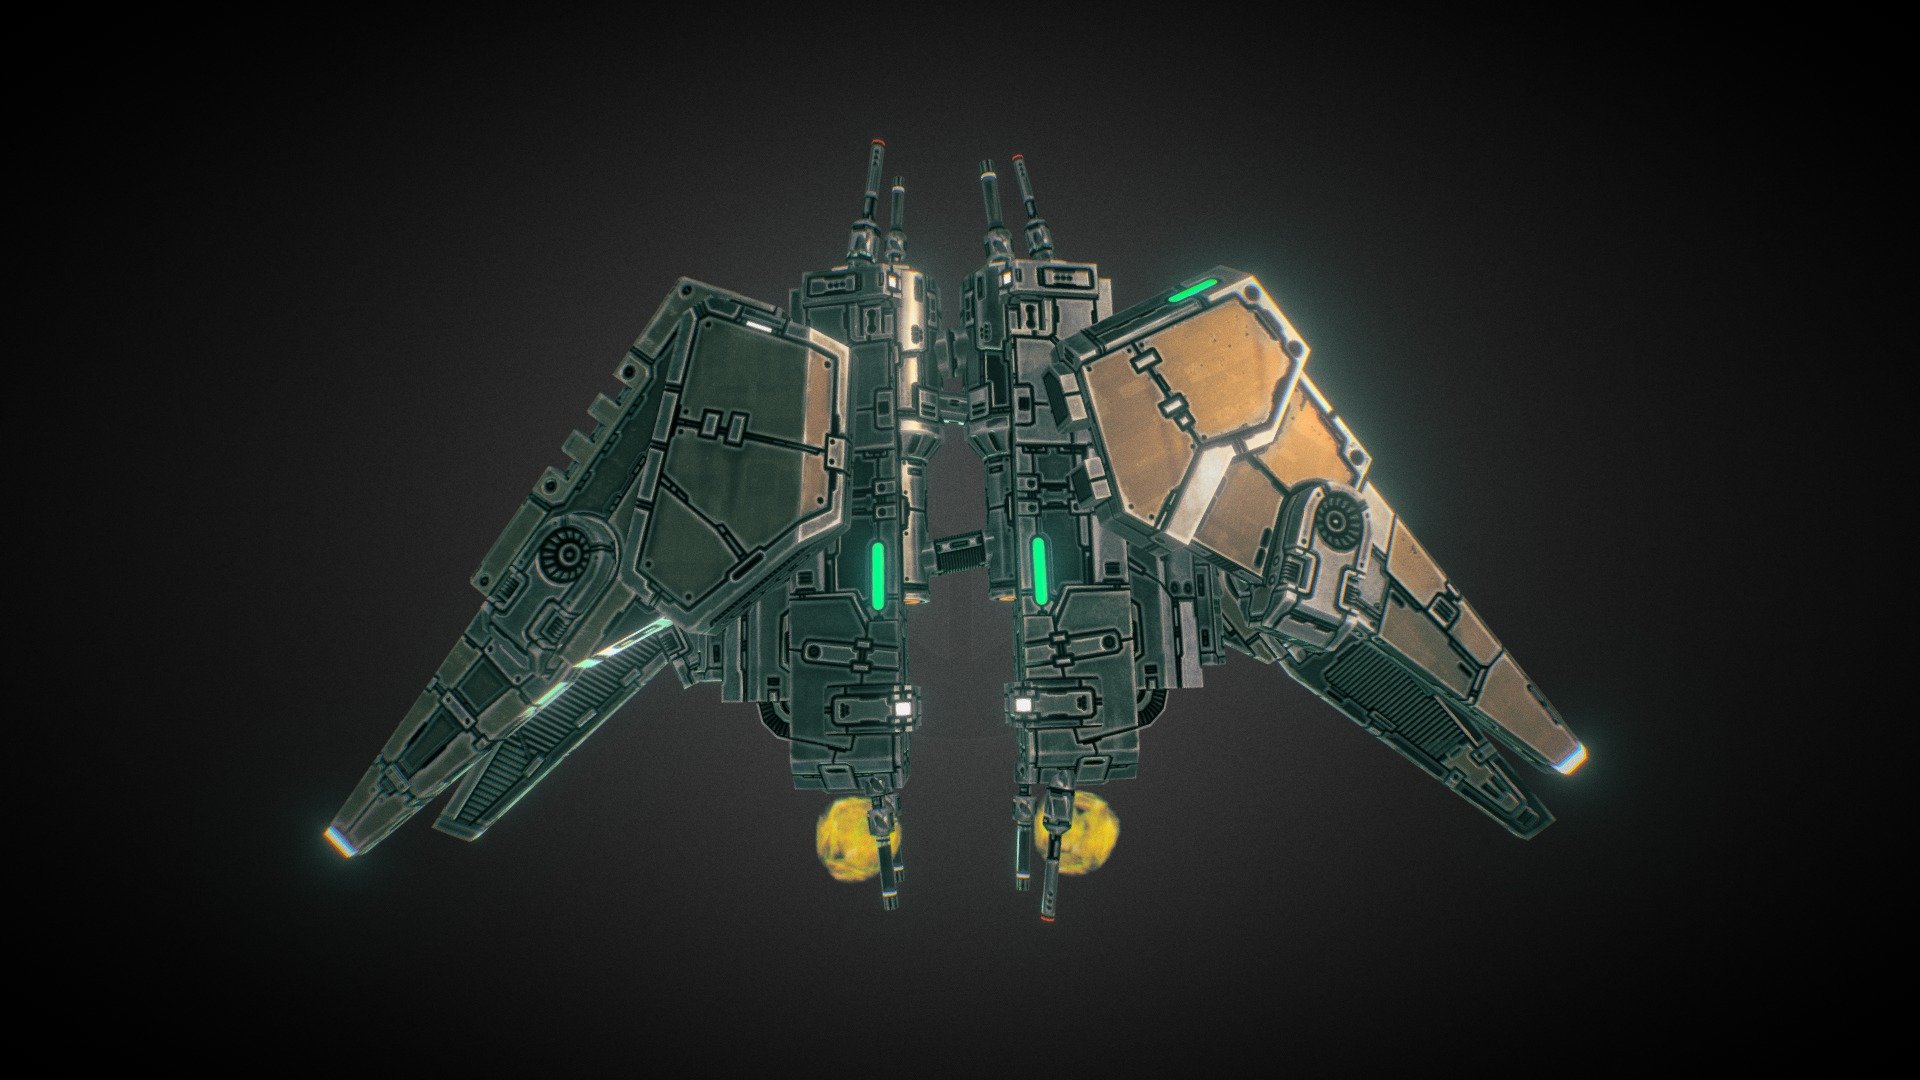 In-game model of a small spaceship belonging to the Deprived faction.
Learn more about the game at http://starfalltactics.com/ - Starfall Tactics — Cassandra Deprived cruiser - 3D model by Snowforged Entertainment (@snowforged) 3d model